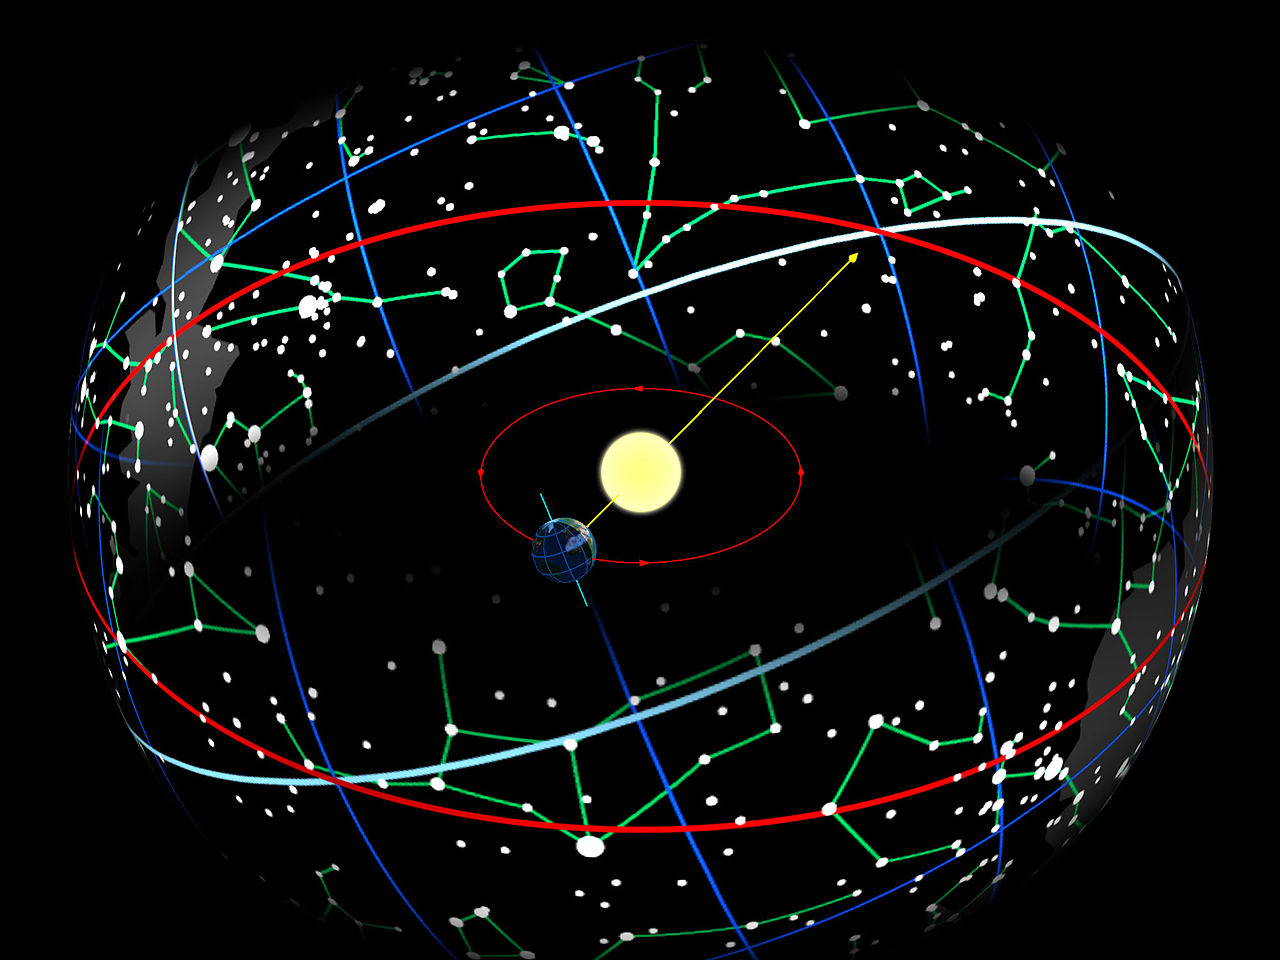 An illustration of the sun's path throughout the year as it crosses in front of the stars that represent the signs of the zodiac.